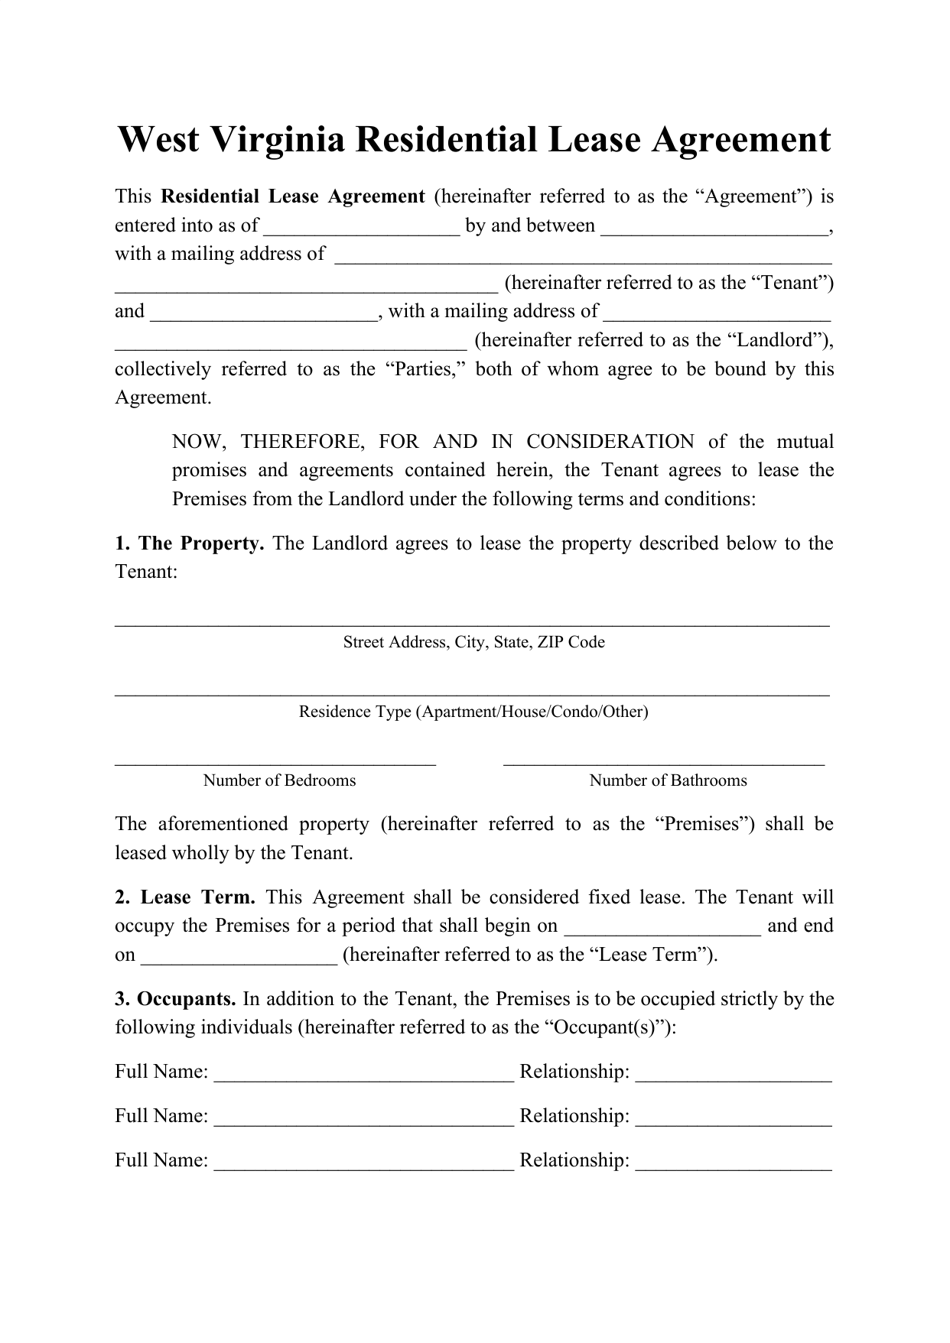 Residential Lease Agreement Template - West Virginia, Page 1